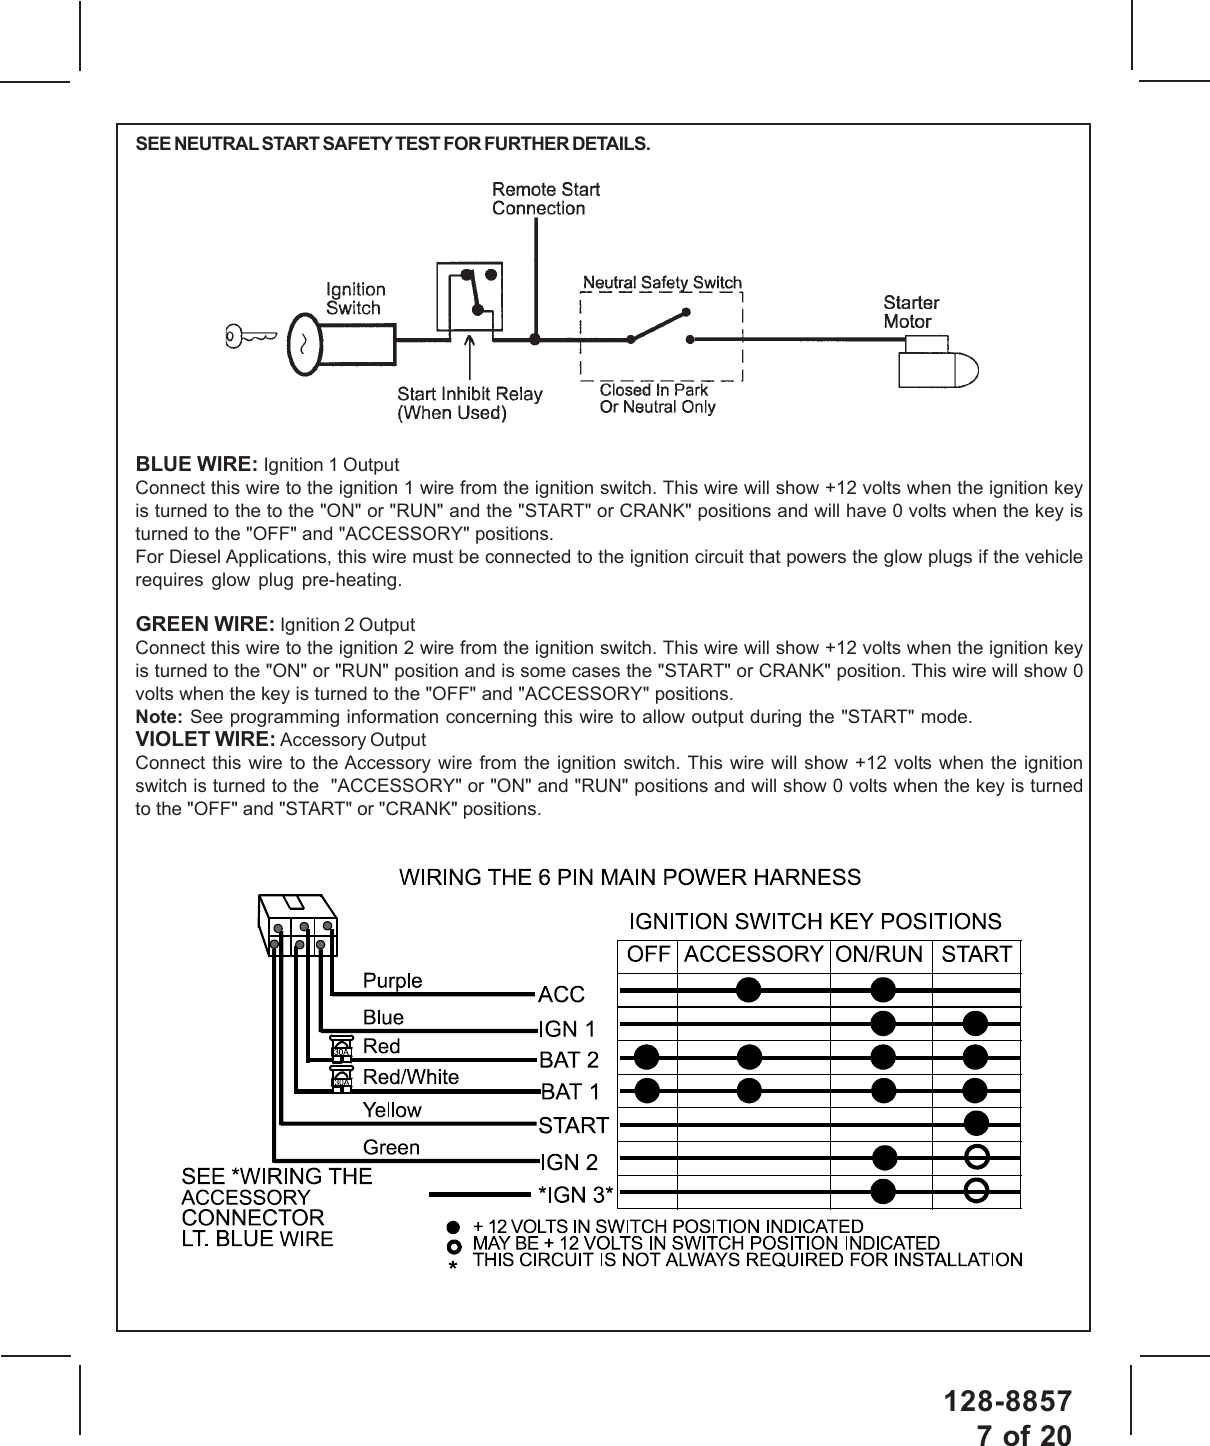 128-88577 of 20SEE NEUTRAL START SAFETY TEST FOR FURTHER DETAILS.BLUE WIRE: Ignition 1 OutputConnect this wire to the ignition 1 wire from the ignition switch. This wire will show +12 volts when the ignition keyis turned to the to the &quot;ON&quot; or &quot;RUN&quot; and the &quot;START&quot; or CRANK&quot; positions and will have 0 volts when the key isturned to the &quot;OFF&quot; and &quot;ACCESSORY&quot; positions.For Diesel Applications, this wire must be connected to the ignition circuit that powers the glow plugs if the vehiclerequires glow plug pre-heating.GREEN WIRE: Ignition 2 OutputConnect this wire to the ignition 2 wire from the ignition switch. This wire will show +12 volts when the ignition keyis turned to the &quot;ON&quot; or &quot;RUN&quot; position and is some cases the &quot;START&quot; or CRANK&quot; position. This wire will show 0volts when the key is turned to the &quot;OFF&quot; and &quot;ACCESSORY&quot; positions.Note: See programming information concerning this wire to allow output during the &quot;START&quot; mode.VIOLET WIRE: Accessory OutputConnect this wire to the Accessory wire from the ignition switch. This wire will show +12 volts when the ignitionswitch is turned to the  &quot;ACCESSORY&quot; or &quot;ON&quot; and &quot;RUN&quot; positions and will show 0 volts when the key is turnedto the &quot;OFF&quot; and &quot;START&quot; or &quot;CRANK&quot; positions.